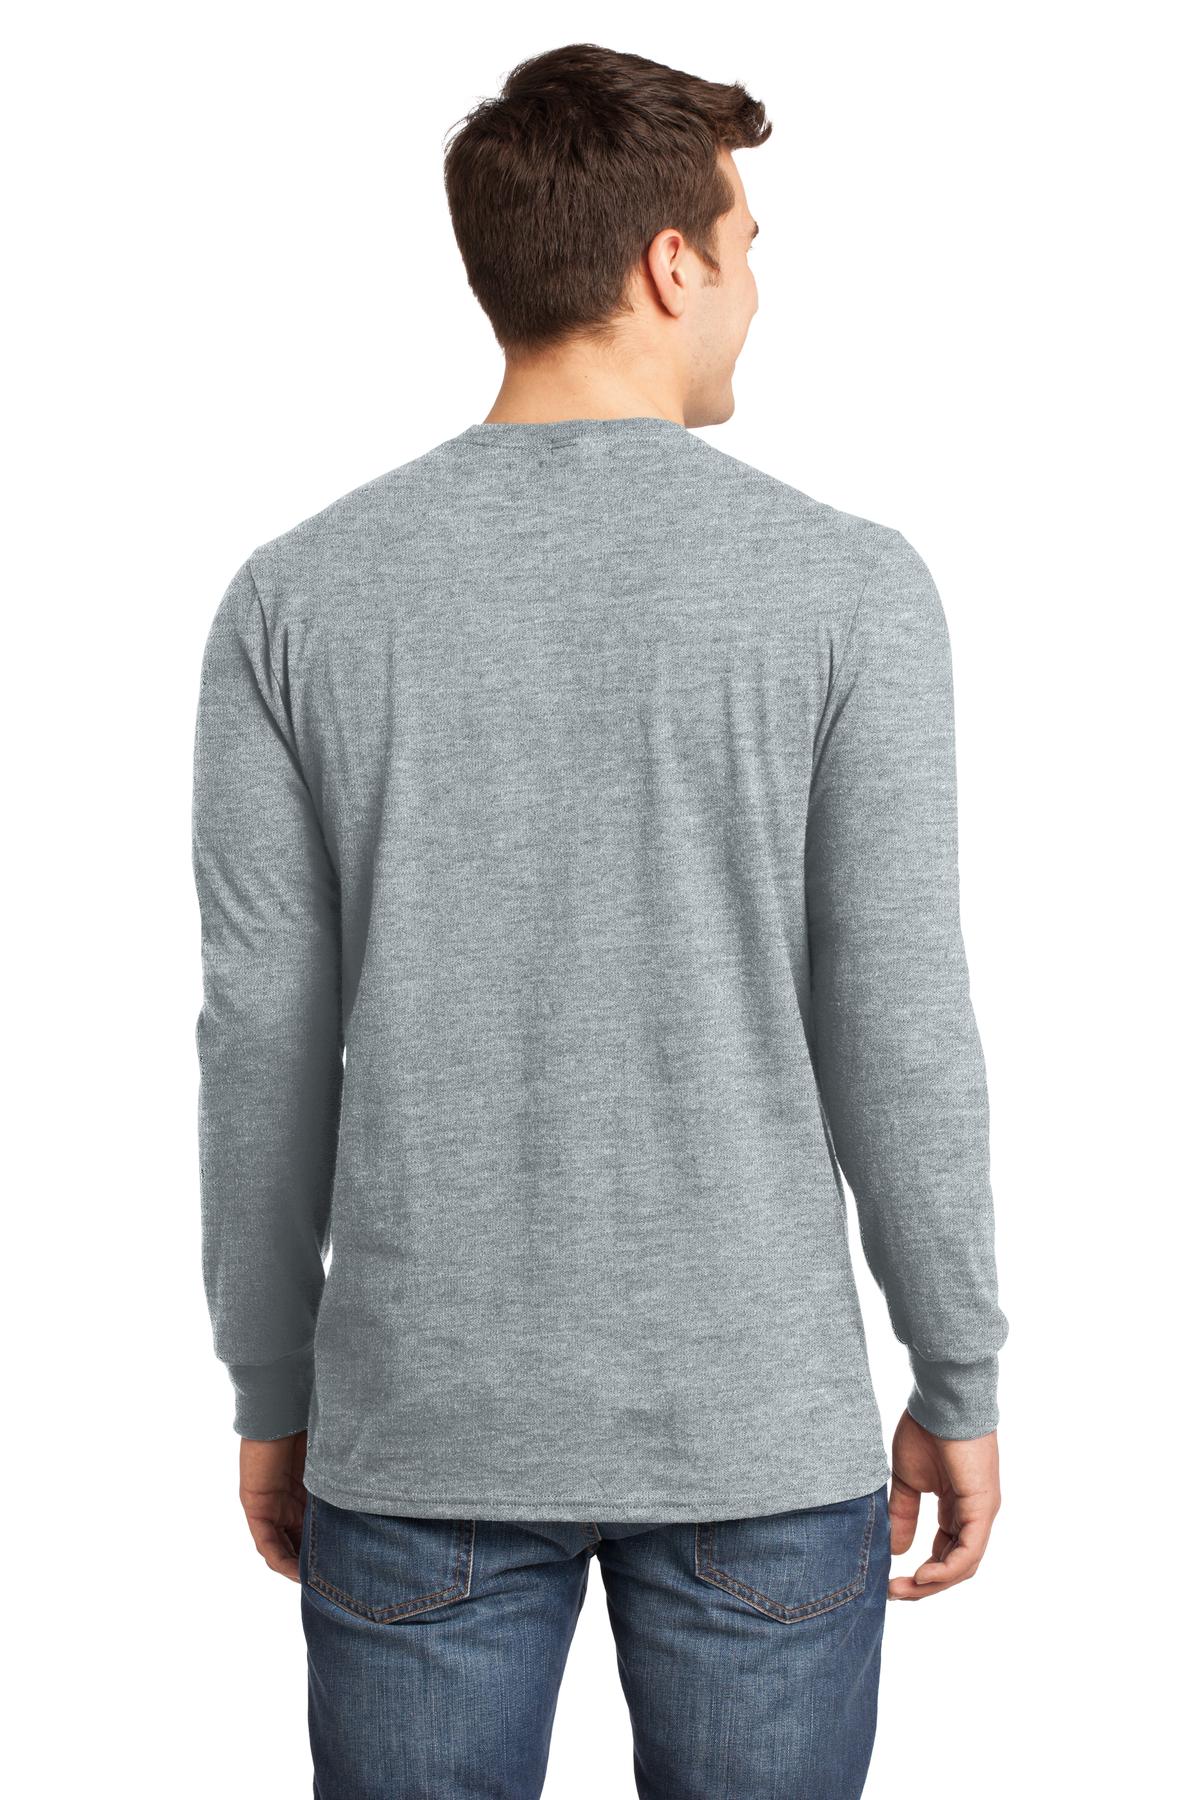 District - Young Mens The Concert Tee Long Sleeve. DT5200